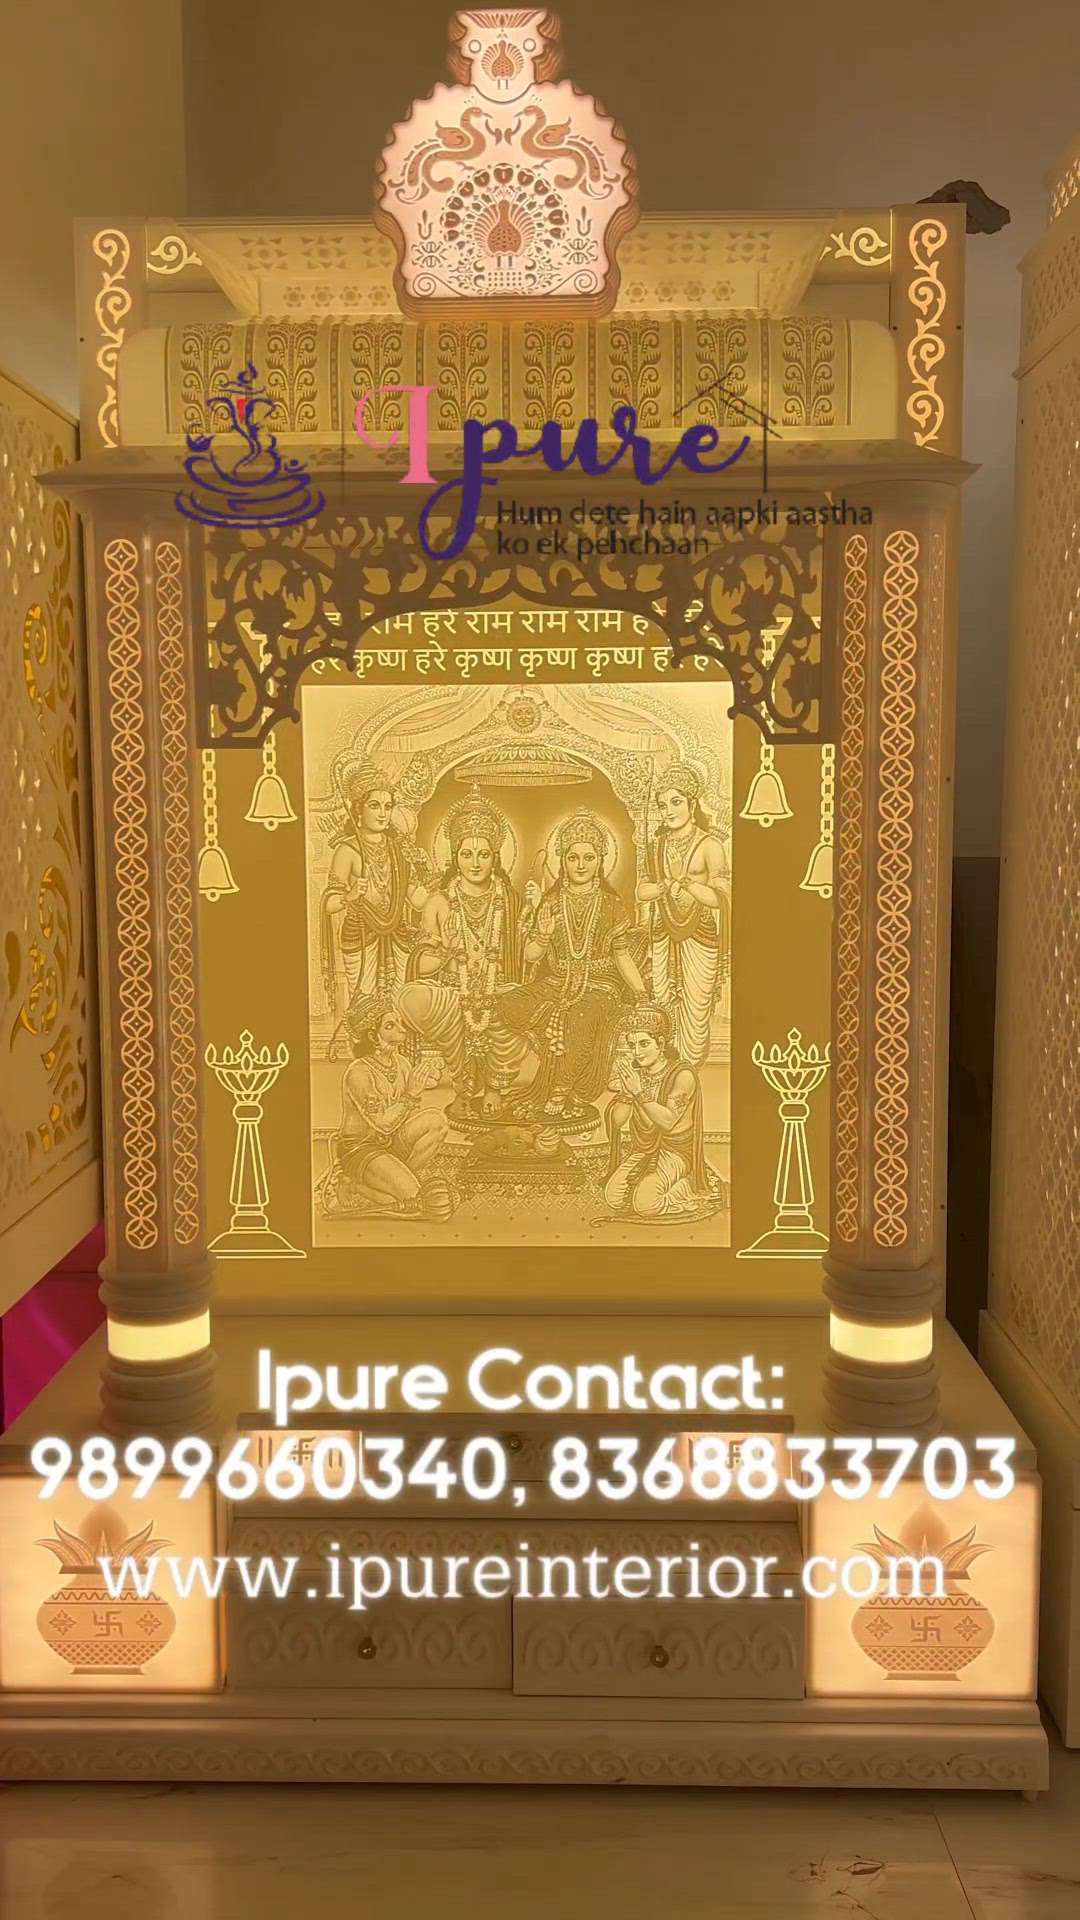 Mandir Manufacturer / Temple Manufacturer

We are the leading Manufacturer of Corian Mandir / Corian Temple or any type of Interior or Exterioe work.

For Price & other details please Contact Mr. Rajesh Biswas on CALL/WHATSAPP : 8368833703 or 9899660340.

We deliver All Over India & All Over World.

Please check website for address .

Thanks,
Ipure Team
www.ipureinterior.com
https://youtu.be/8tu2NoKYx6w
 
#corian #corianmandir #coriantemple #coriandesign #mandir #mandirdesign #InteriorDesigner #manufacturer #luxurydecor #Architect #architectdesign #Architectural&Interior #LUXURY_INTERIOR #Poojaroom #poojaroomdesign #poojaunit #poojaroomdecor #poojamandir #poojaroominterior  #poojaroomconcepts #pooja #temple